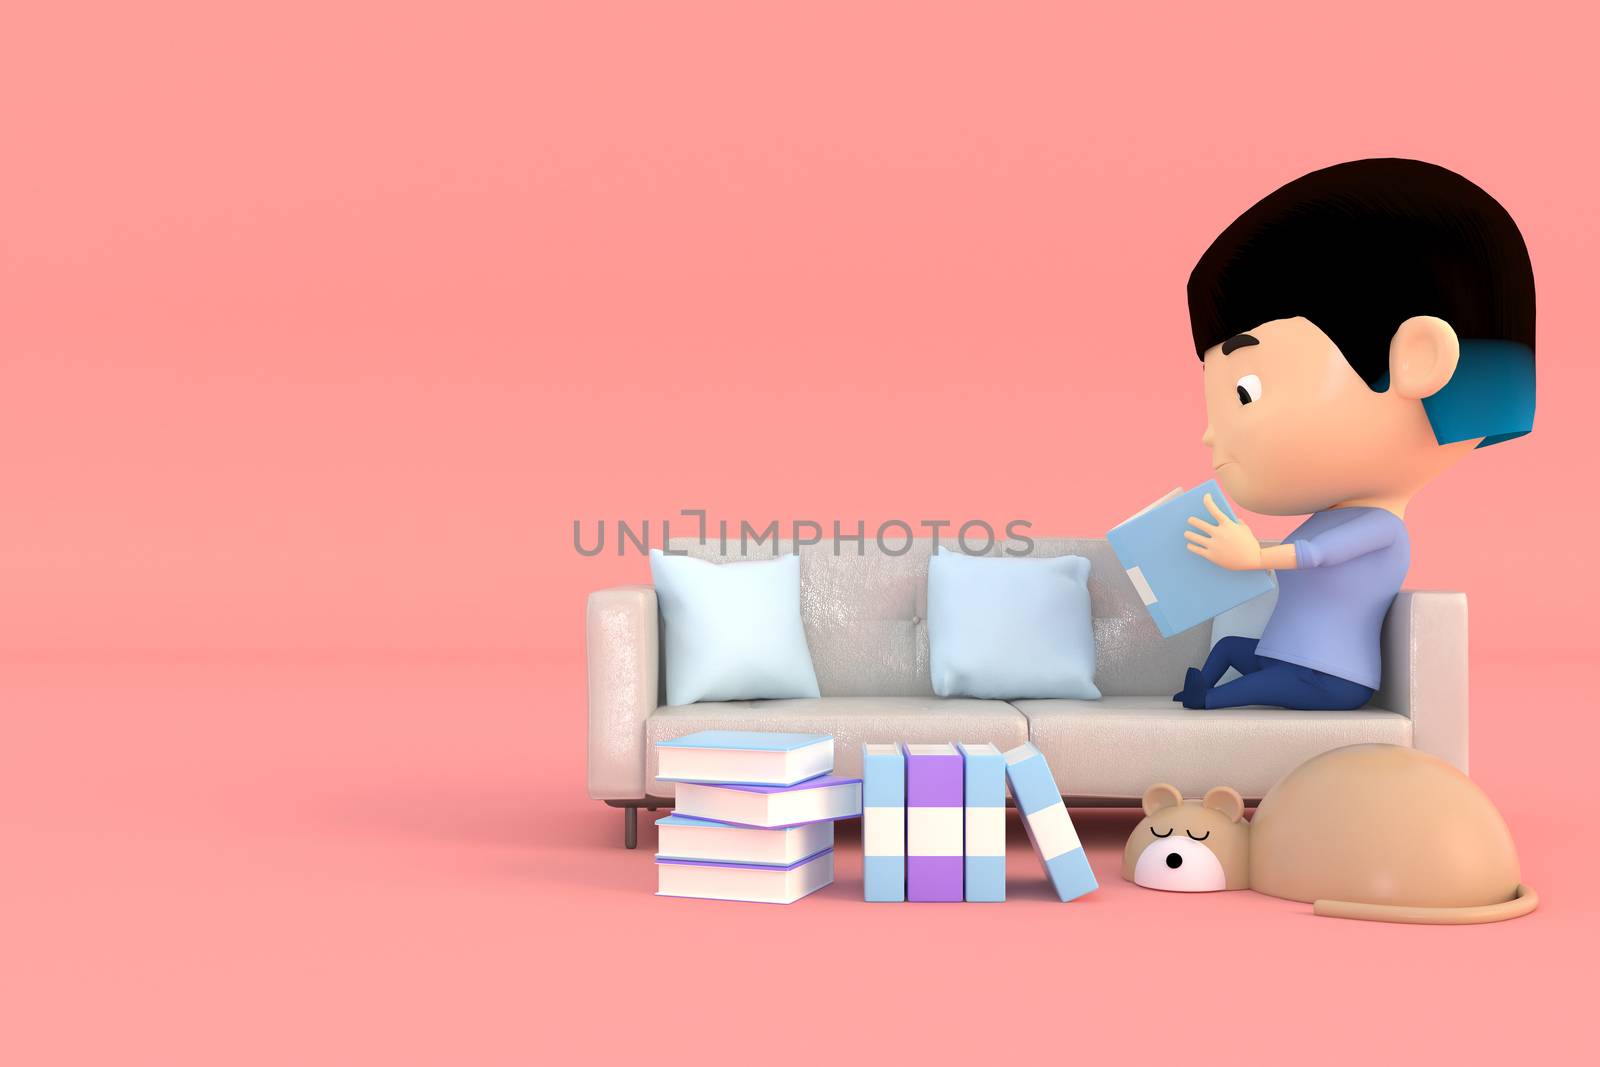 3d illustrator cartoon characters. A girl sitting on the sofa reading